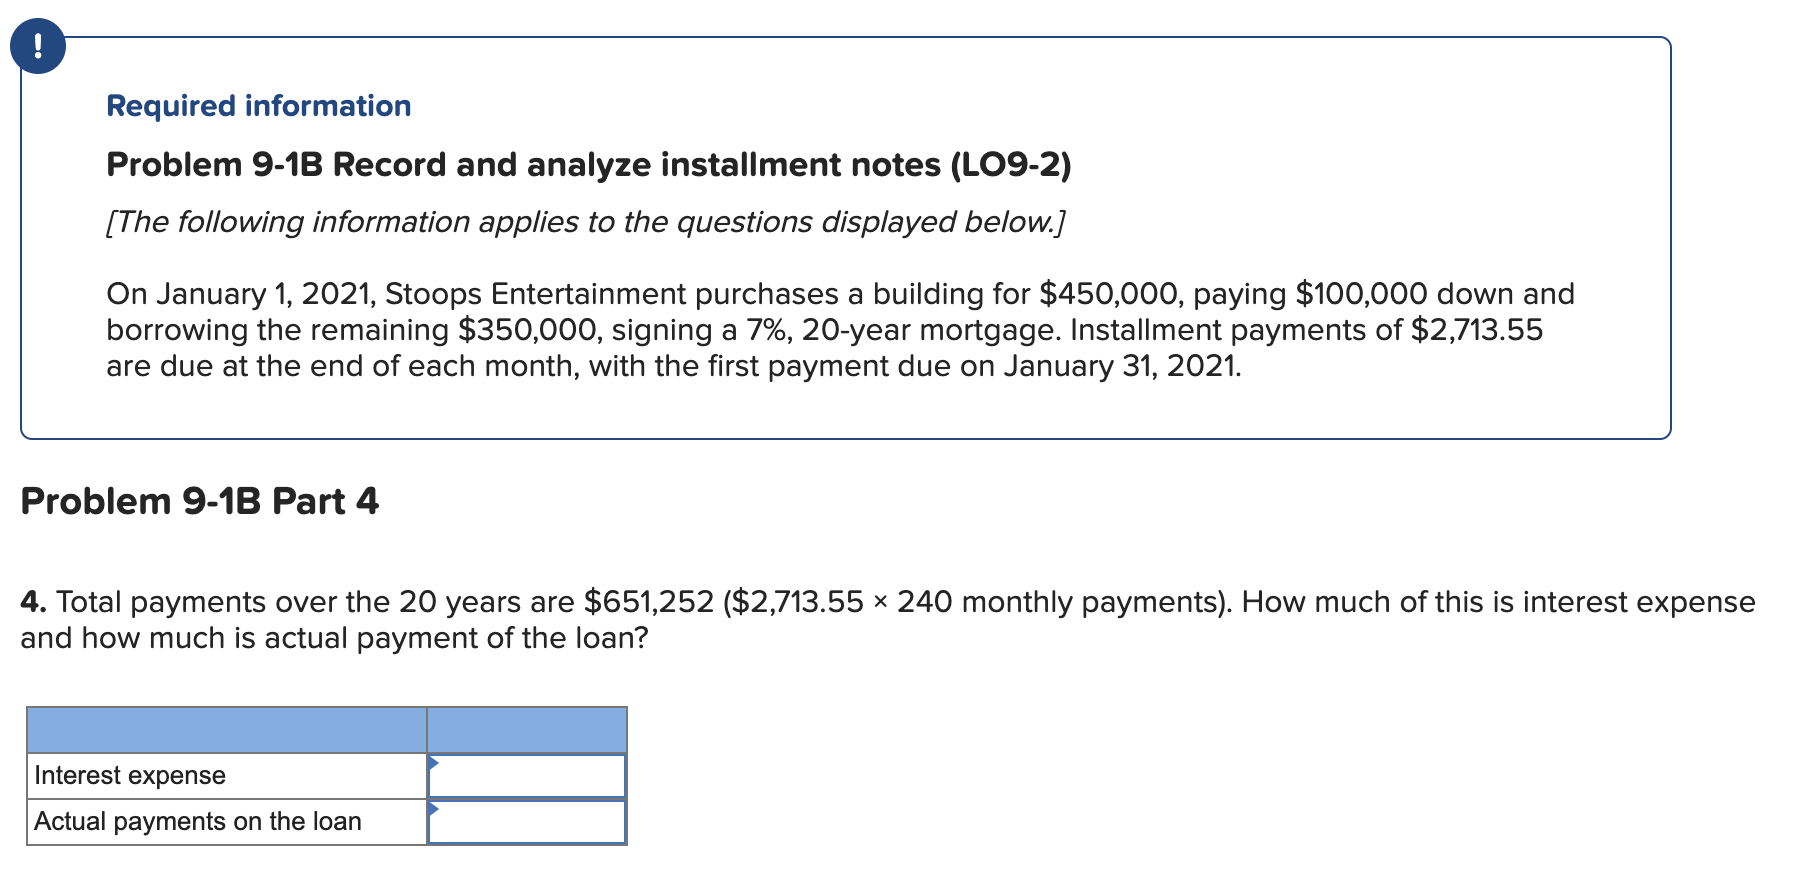 Required information
Problem 9-1B Record and analyze installment notes (LO9-2)
[The following information applies to the questions displayed below.]
On January 1, 2021, Stoops Entertainment purchases a building for $450,000, paying $100,000 down and
borrowing the remaining $350,000, signing a 7%, 20-year mortgage. Installment payments of $2,713.55
are due at the end of each month, with the first payment due on January 31, 2021.
Problem 9-1B Part 4
4. Total payments over the 20 years are $651,252 ($2,713.55 × 240 monthly payments). How much of this is interest expense
and how much is actual payment of the loan?
Interest expense
Actual payments on the loan
